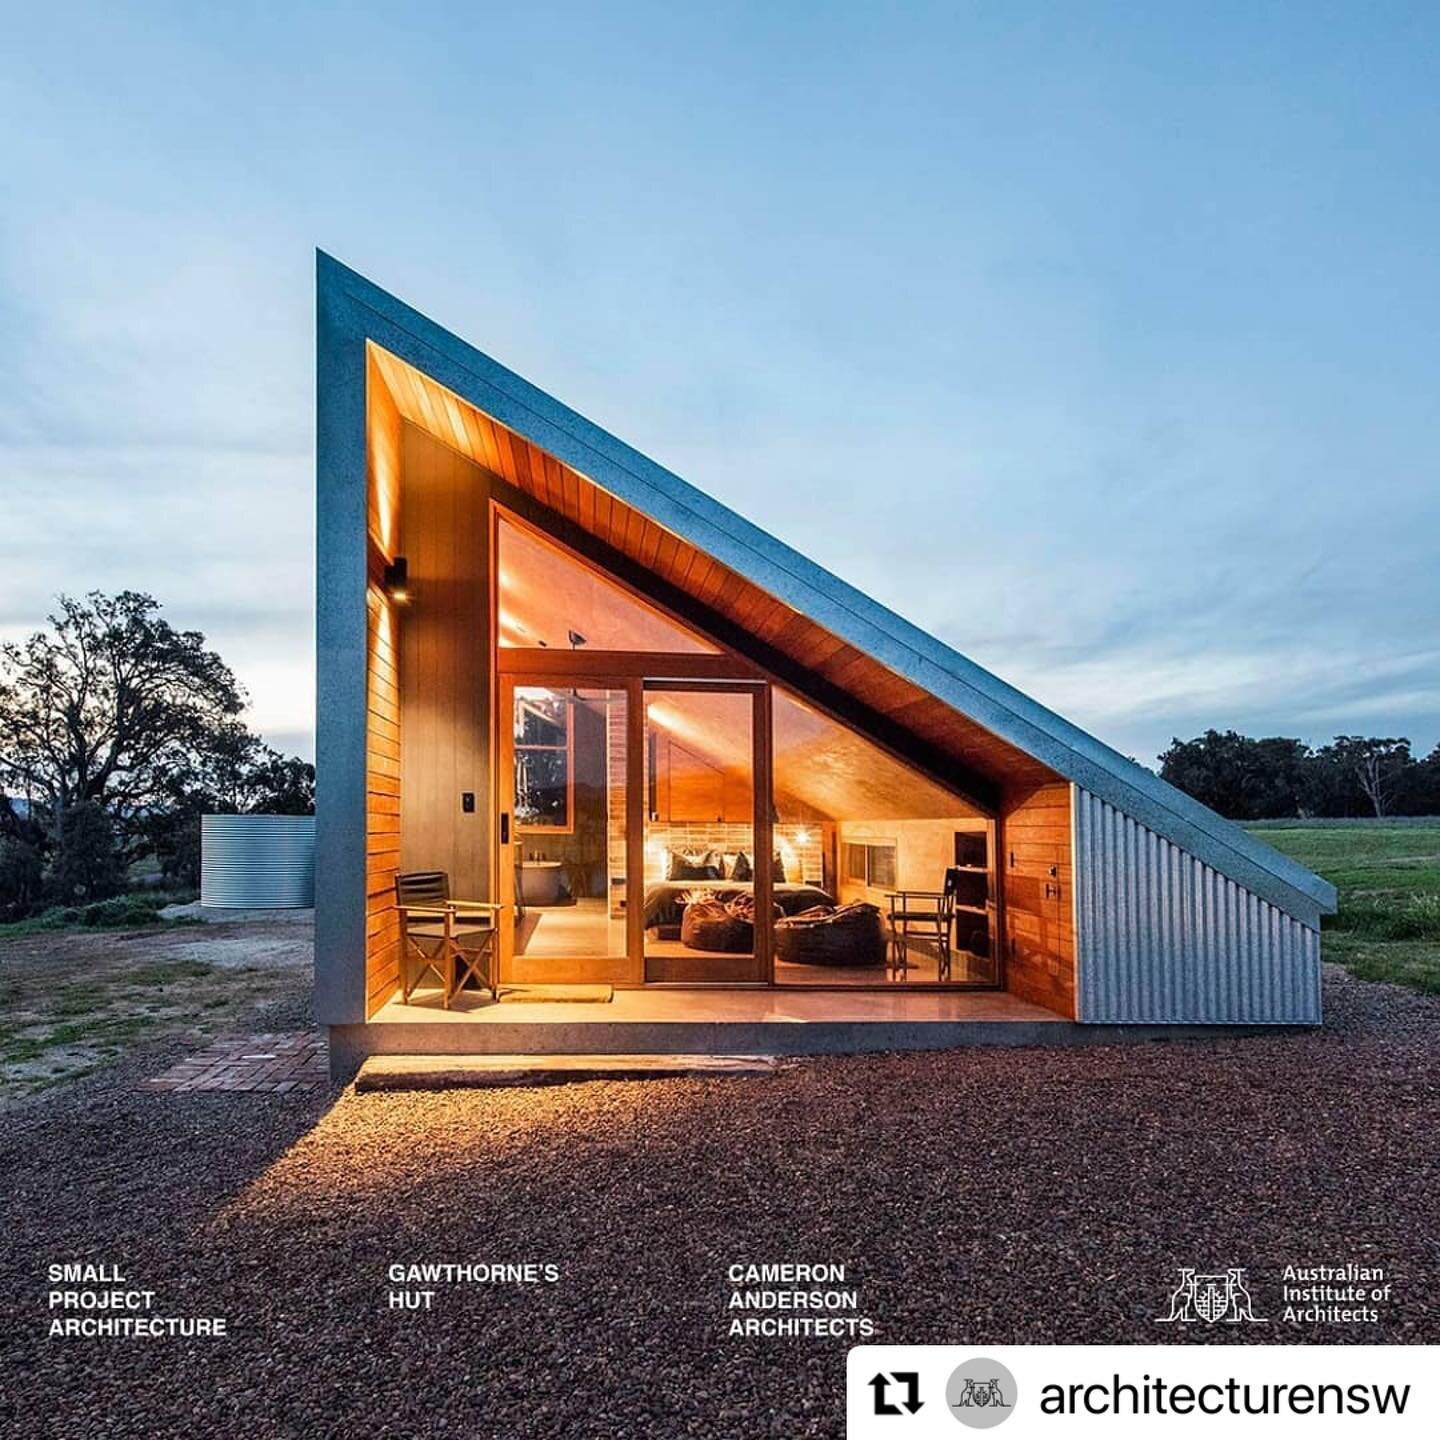 #Repost @architecturensw with @make_repost
・・・
Winner at 2021 NSW Country Division Architecture Awards. 
​
​Congratulations to Cameron Anderson Architects for winning the Small Project Architecture Award for the Gawthorne's Hut Project. 

Photography